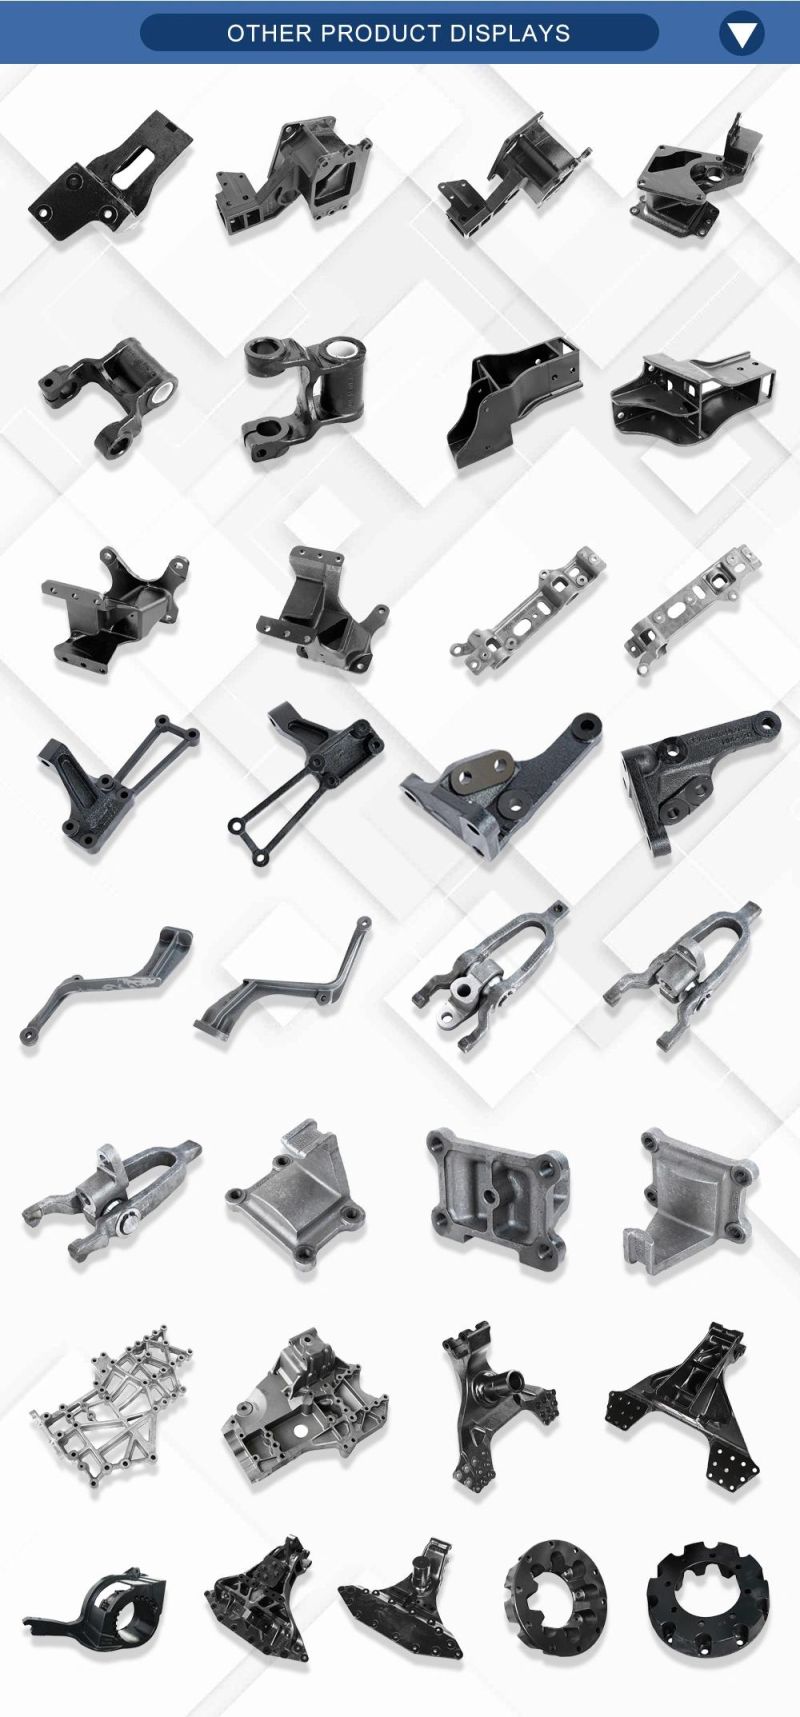 Customized Cast Iron Truck Parts of Different Materials